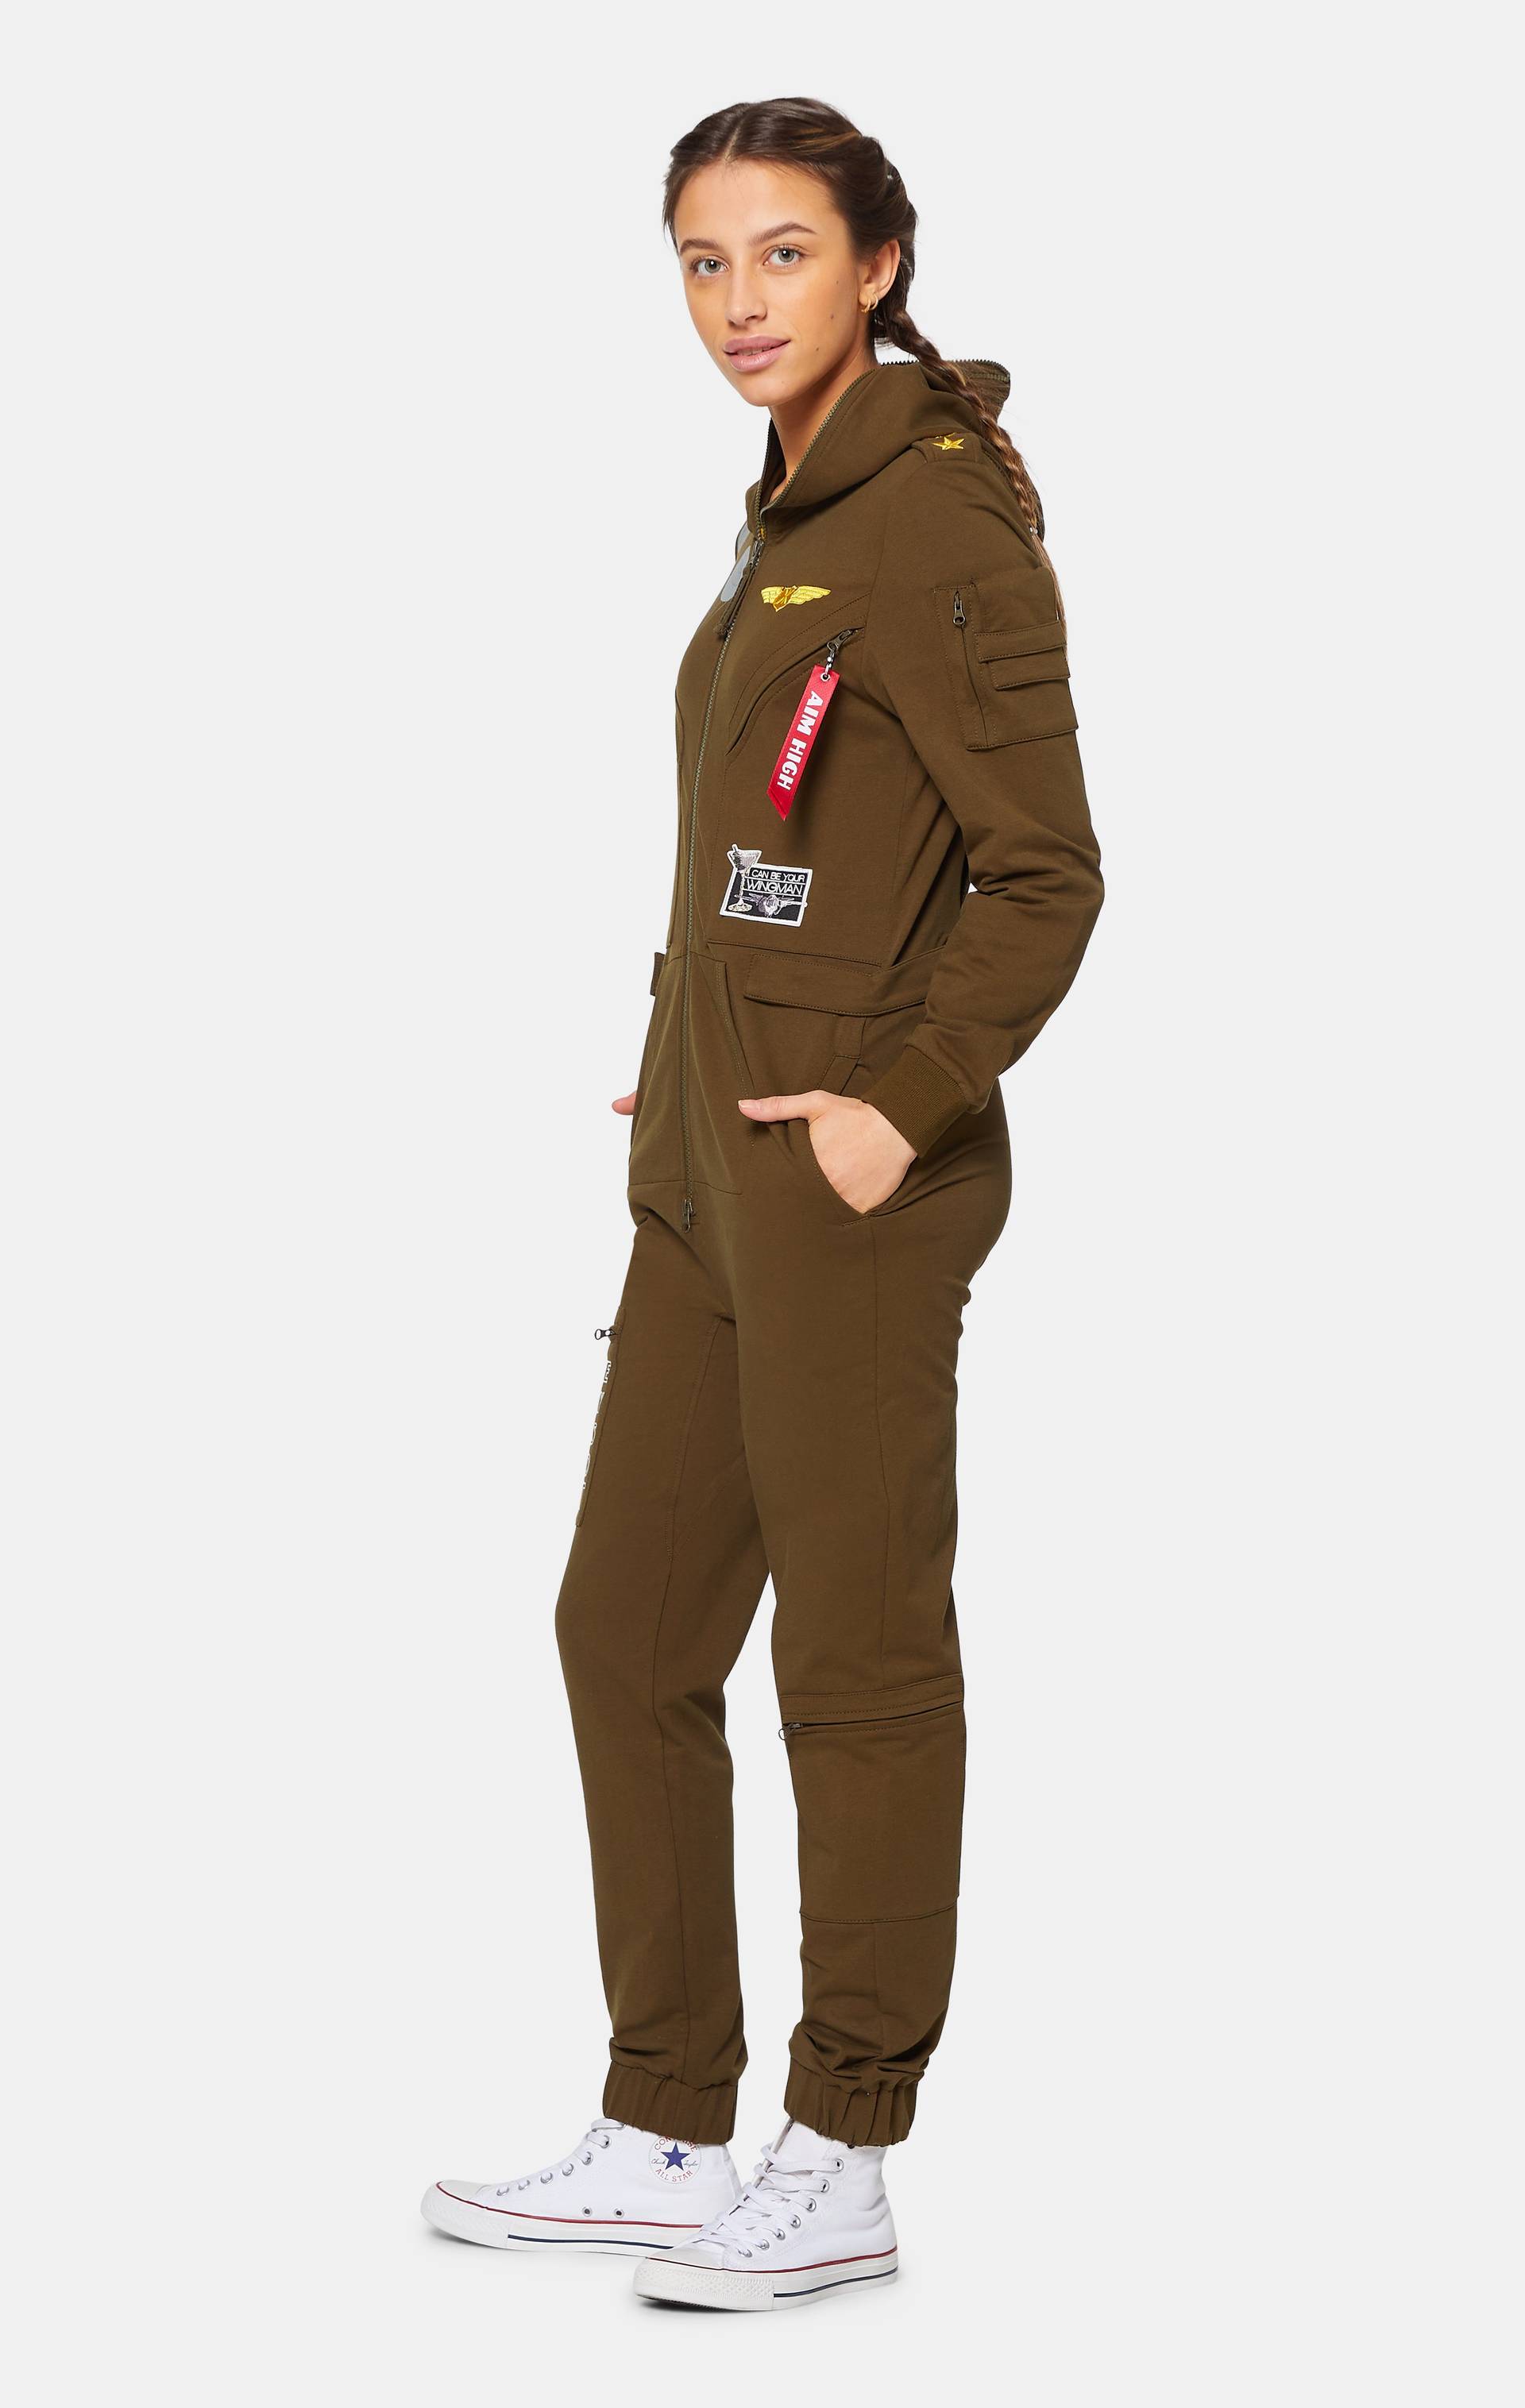 Onepiece The Wingman Jumpsuit Army Green - 10